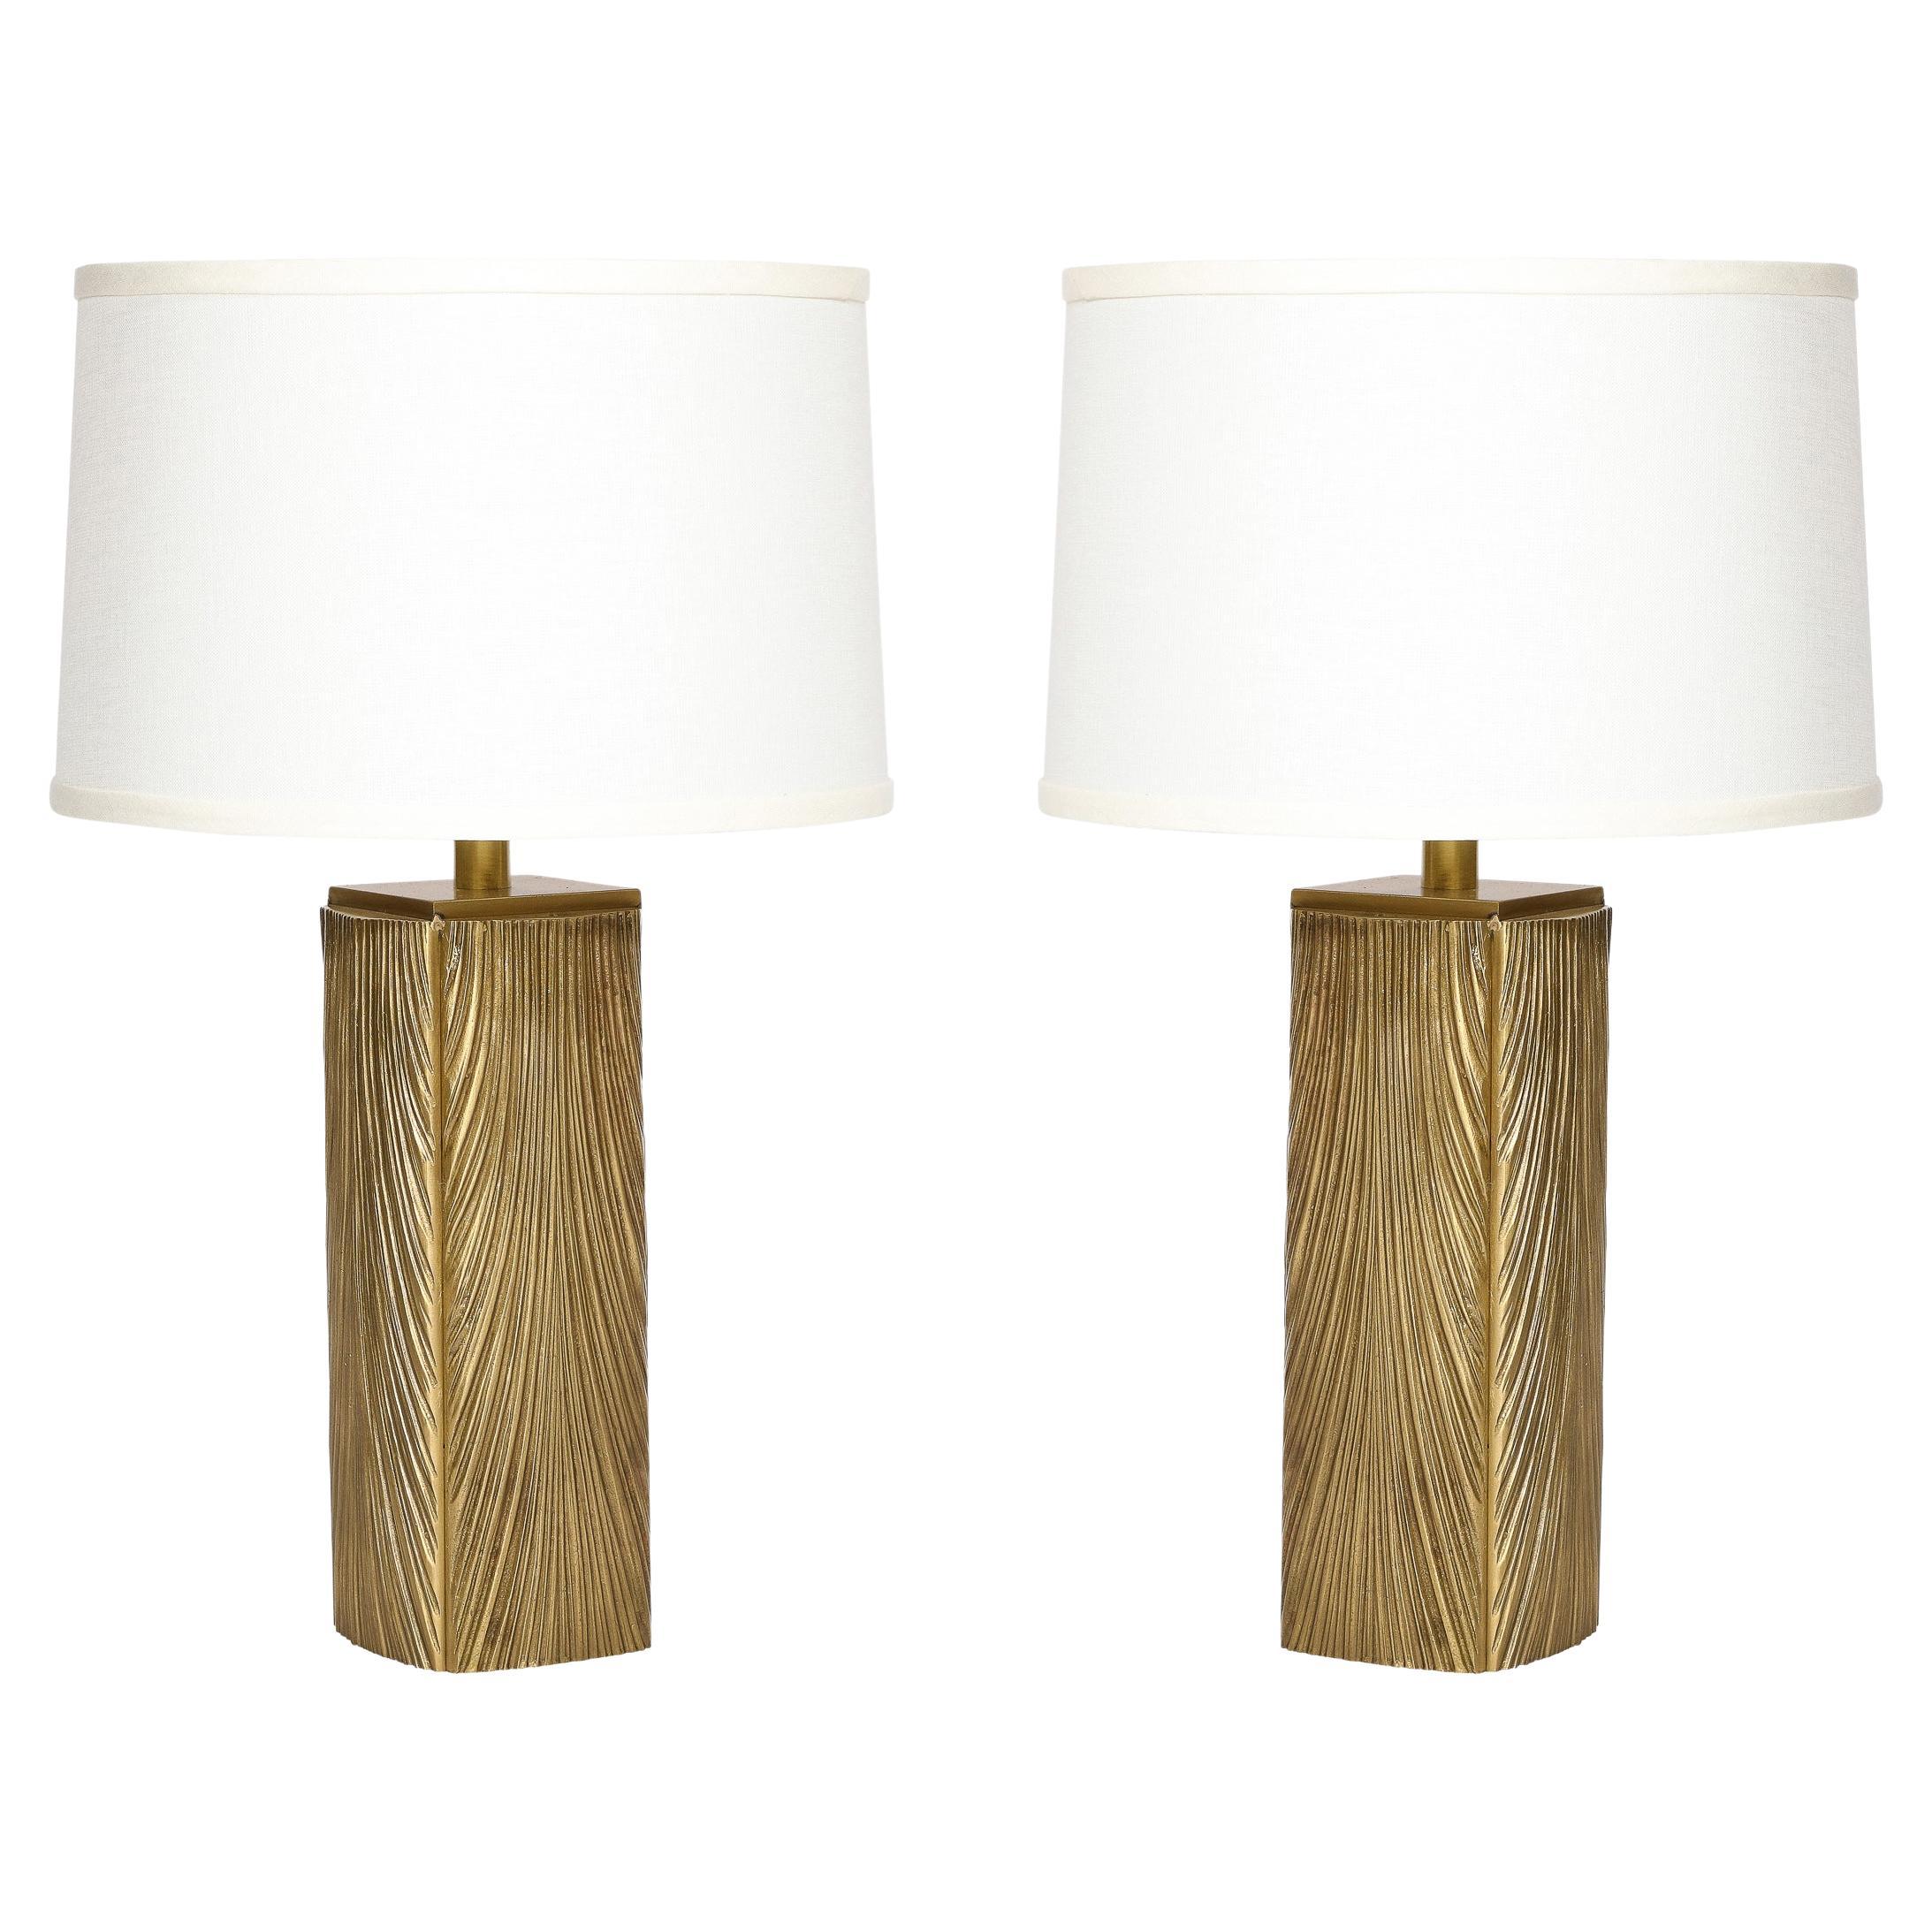 Pair of Midcentury Feathered Brushed Brass Table Lamps by Luciano Frigerio